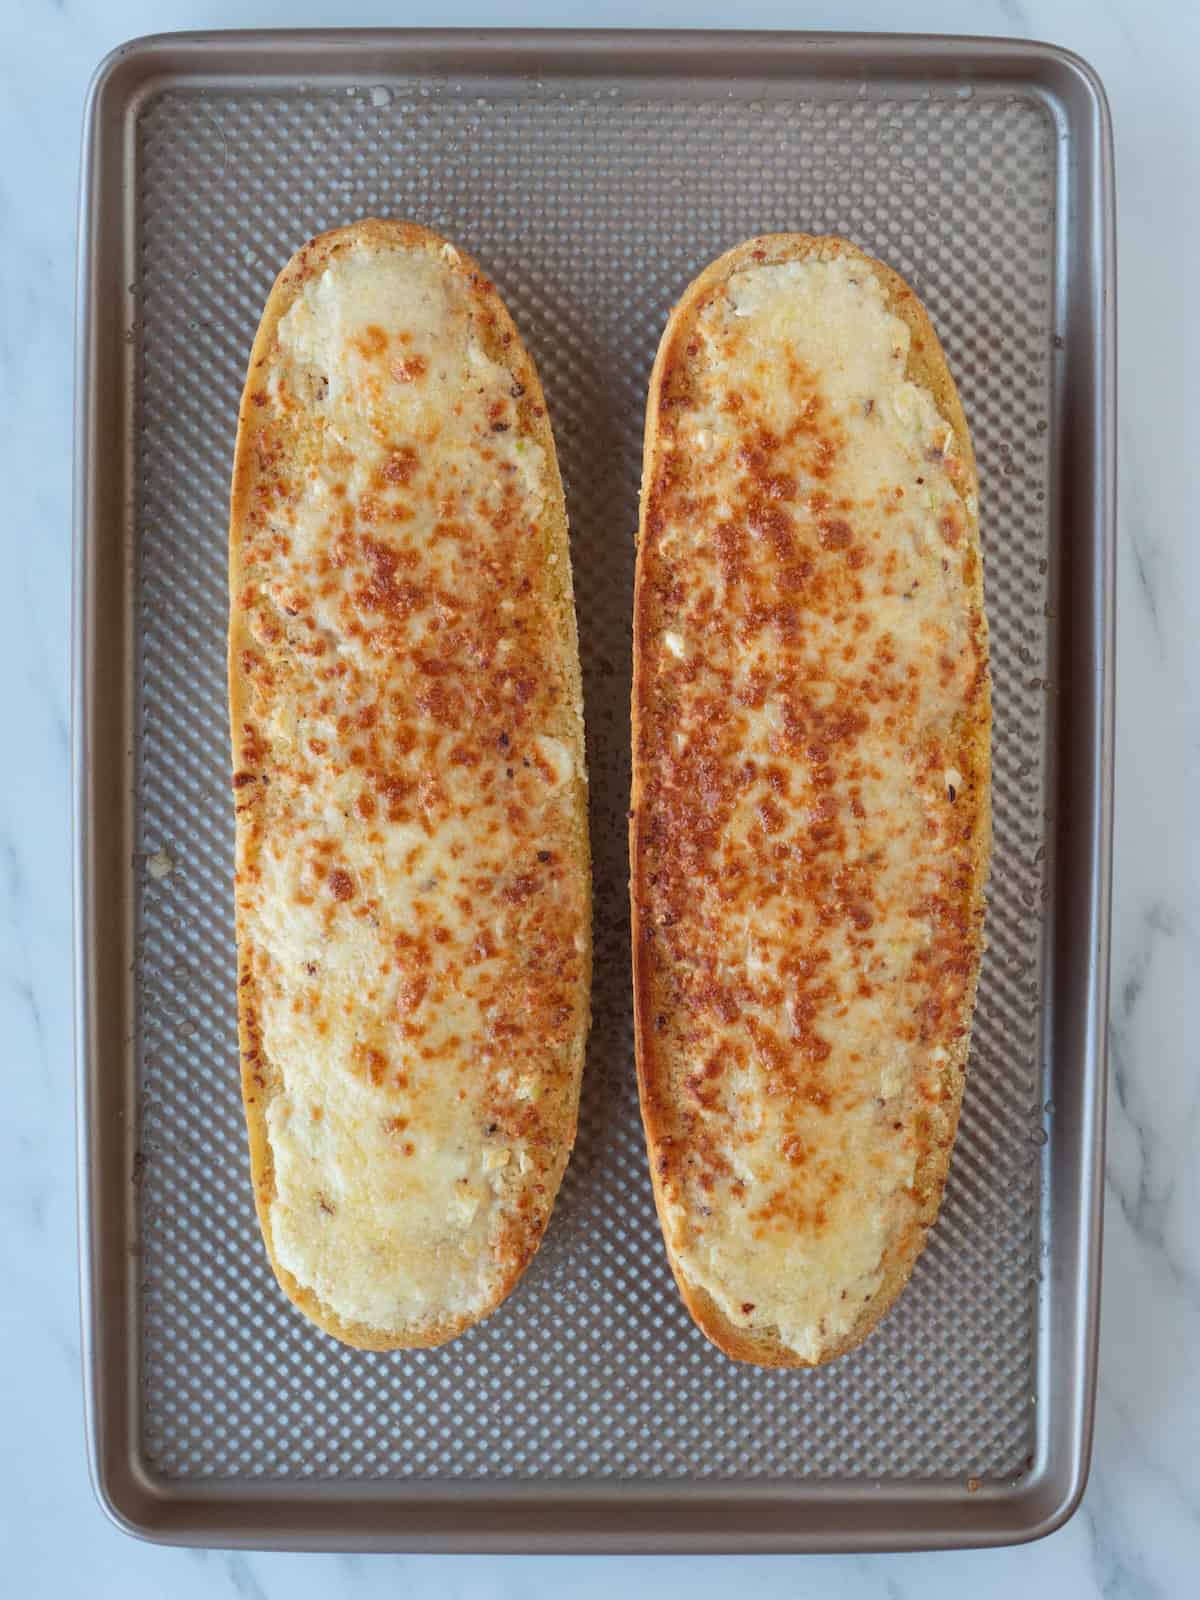 Horizontally cut halves of a bread loaf on a baking sheet, with the butter cheese garlic red pepper flakes mixture on them baked till golden in color, fresh out of the oven.